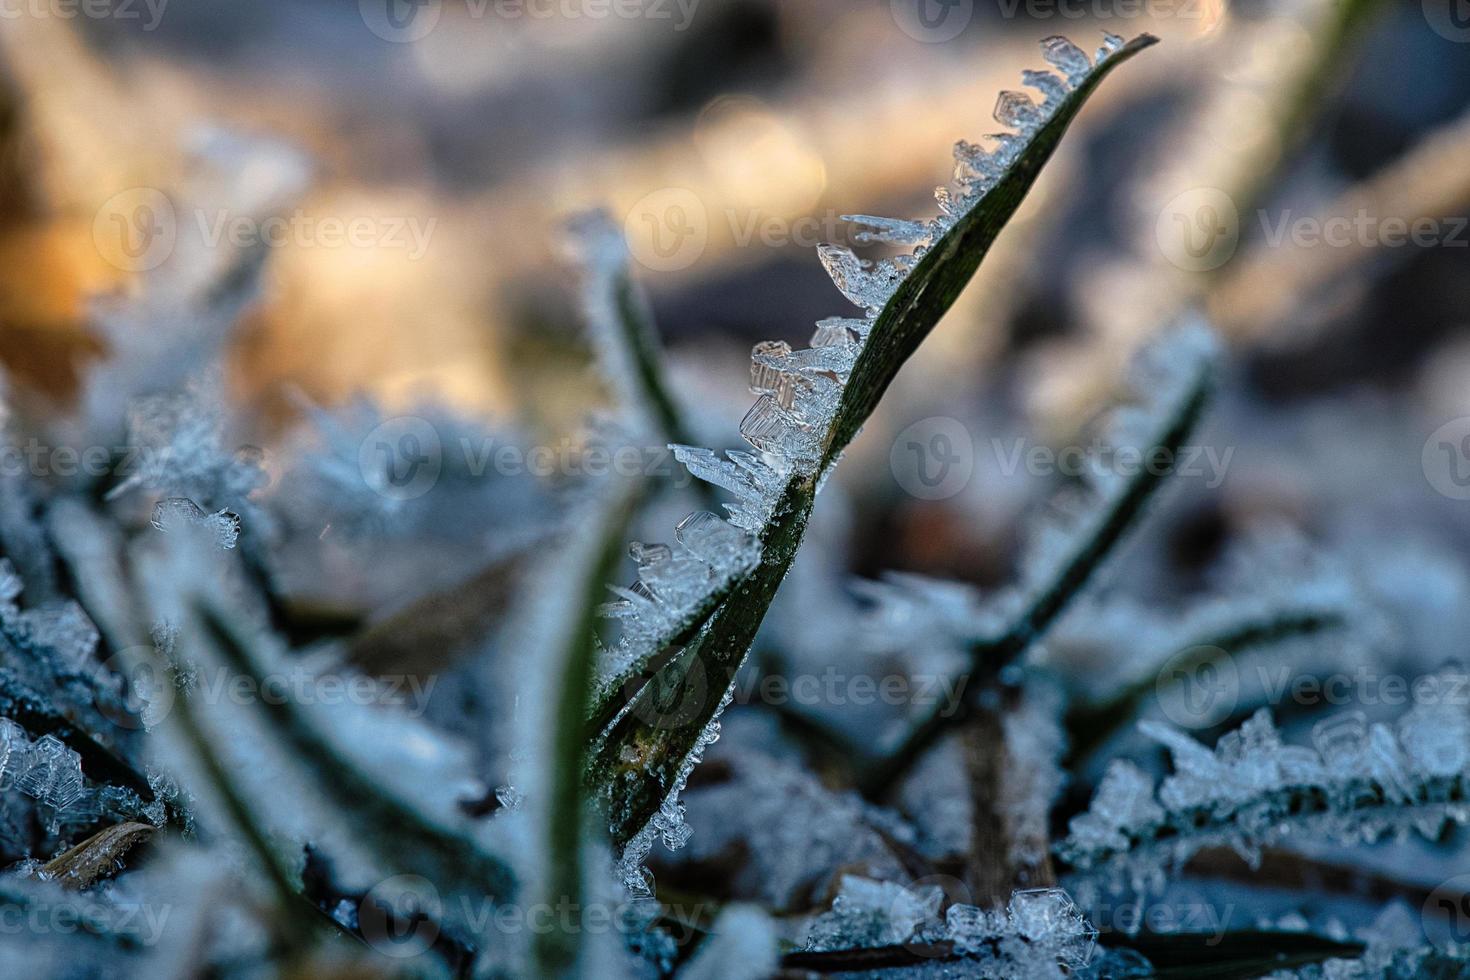 Ice crystals that have formed on blades of grass. Structurally rich and bizarre shapes have emerged. photo